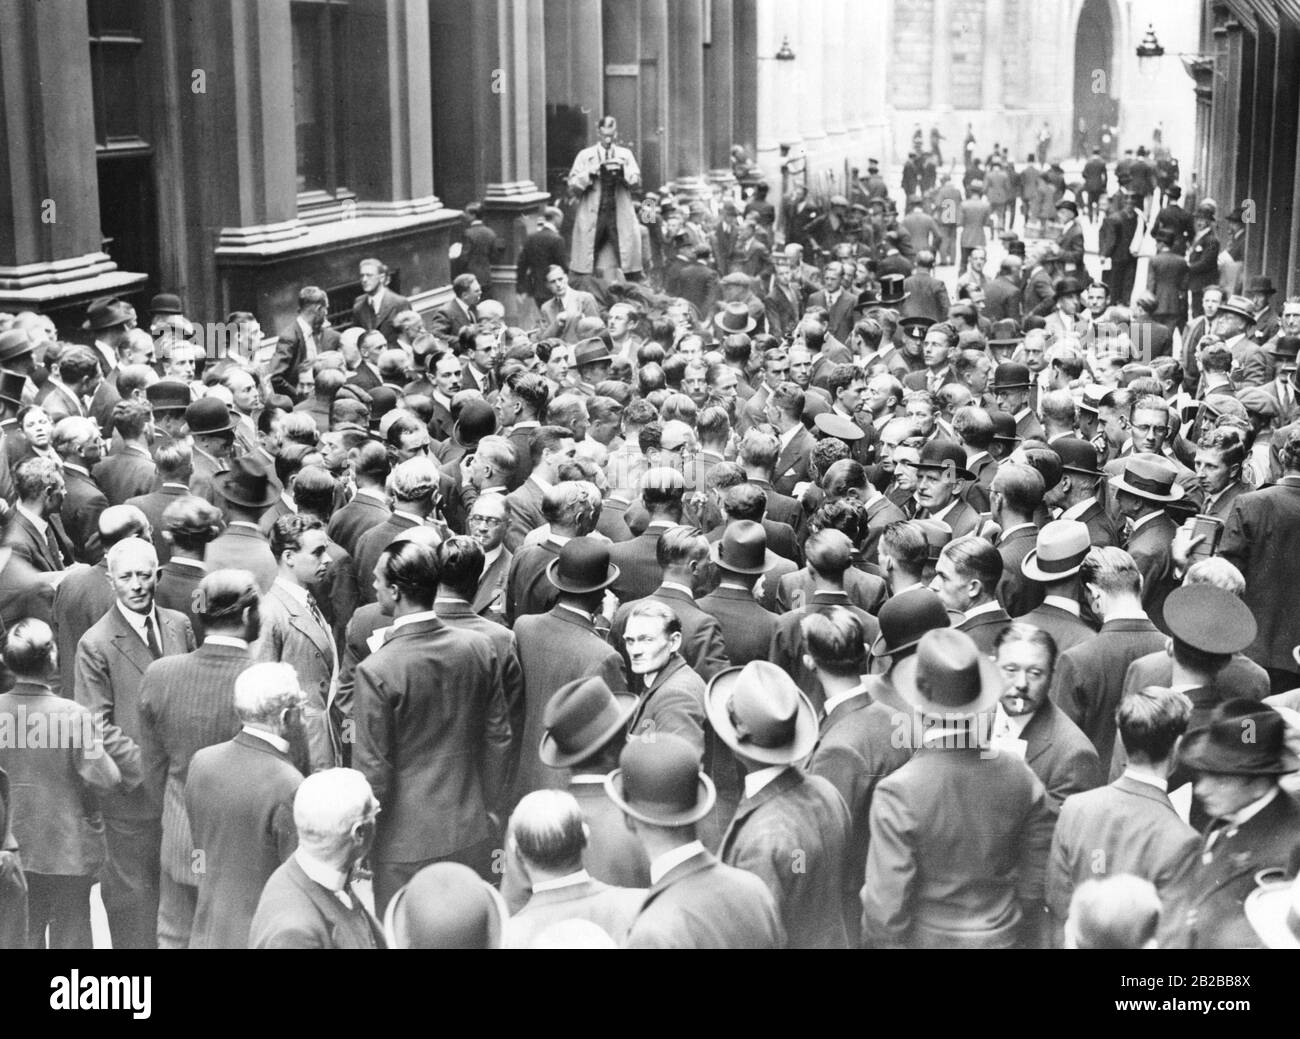 The Great Depression in Great Britain: People trade at Throgmortan Street in front of the stock exchange. Stock Photo